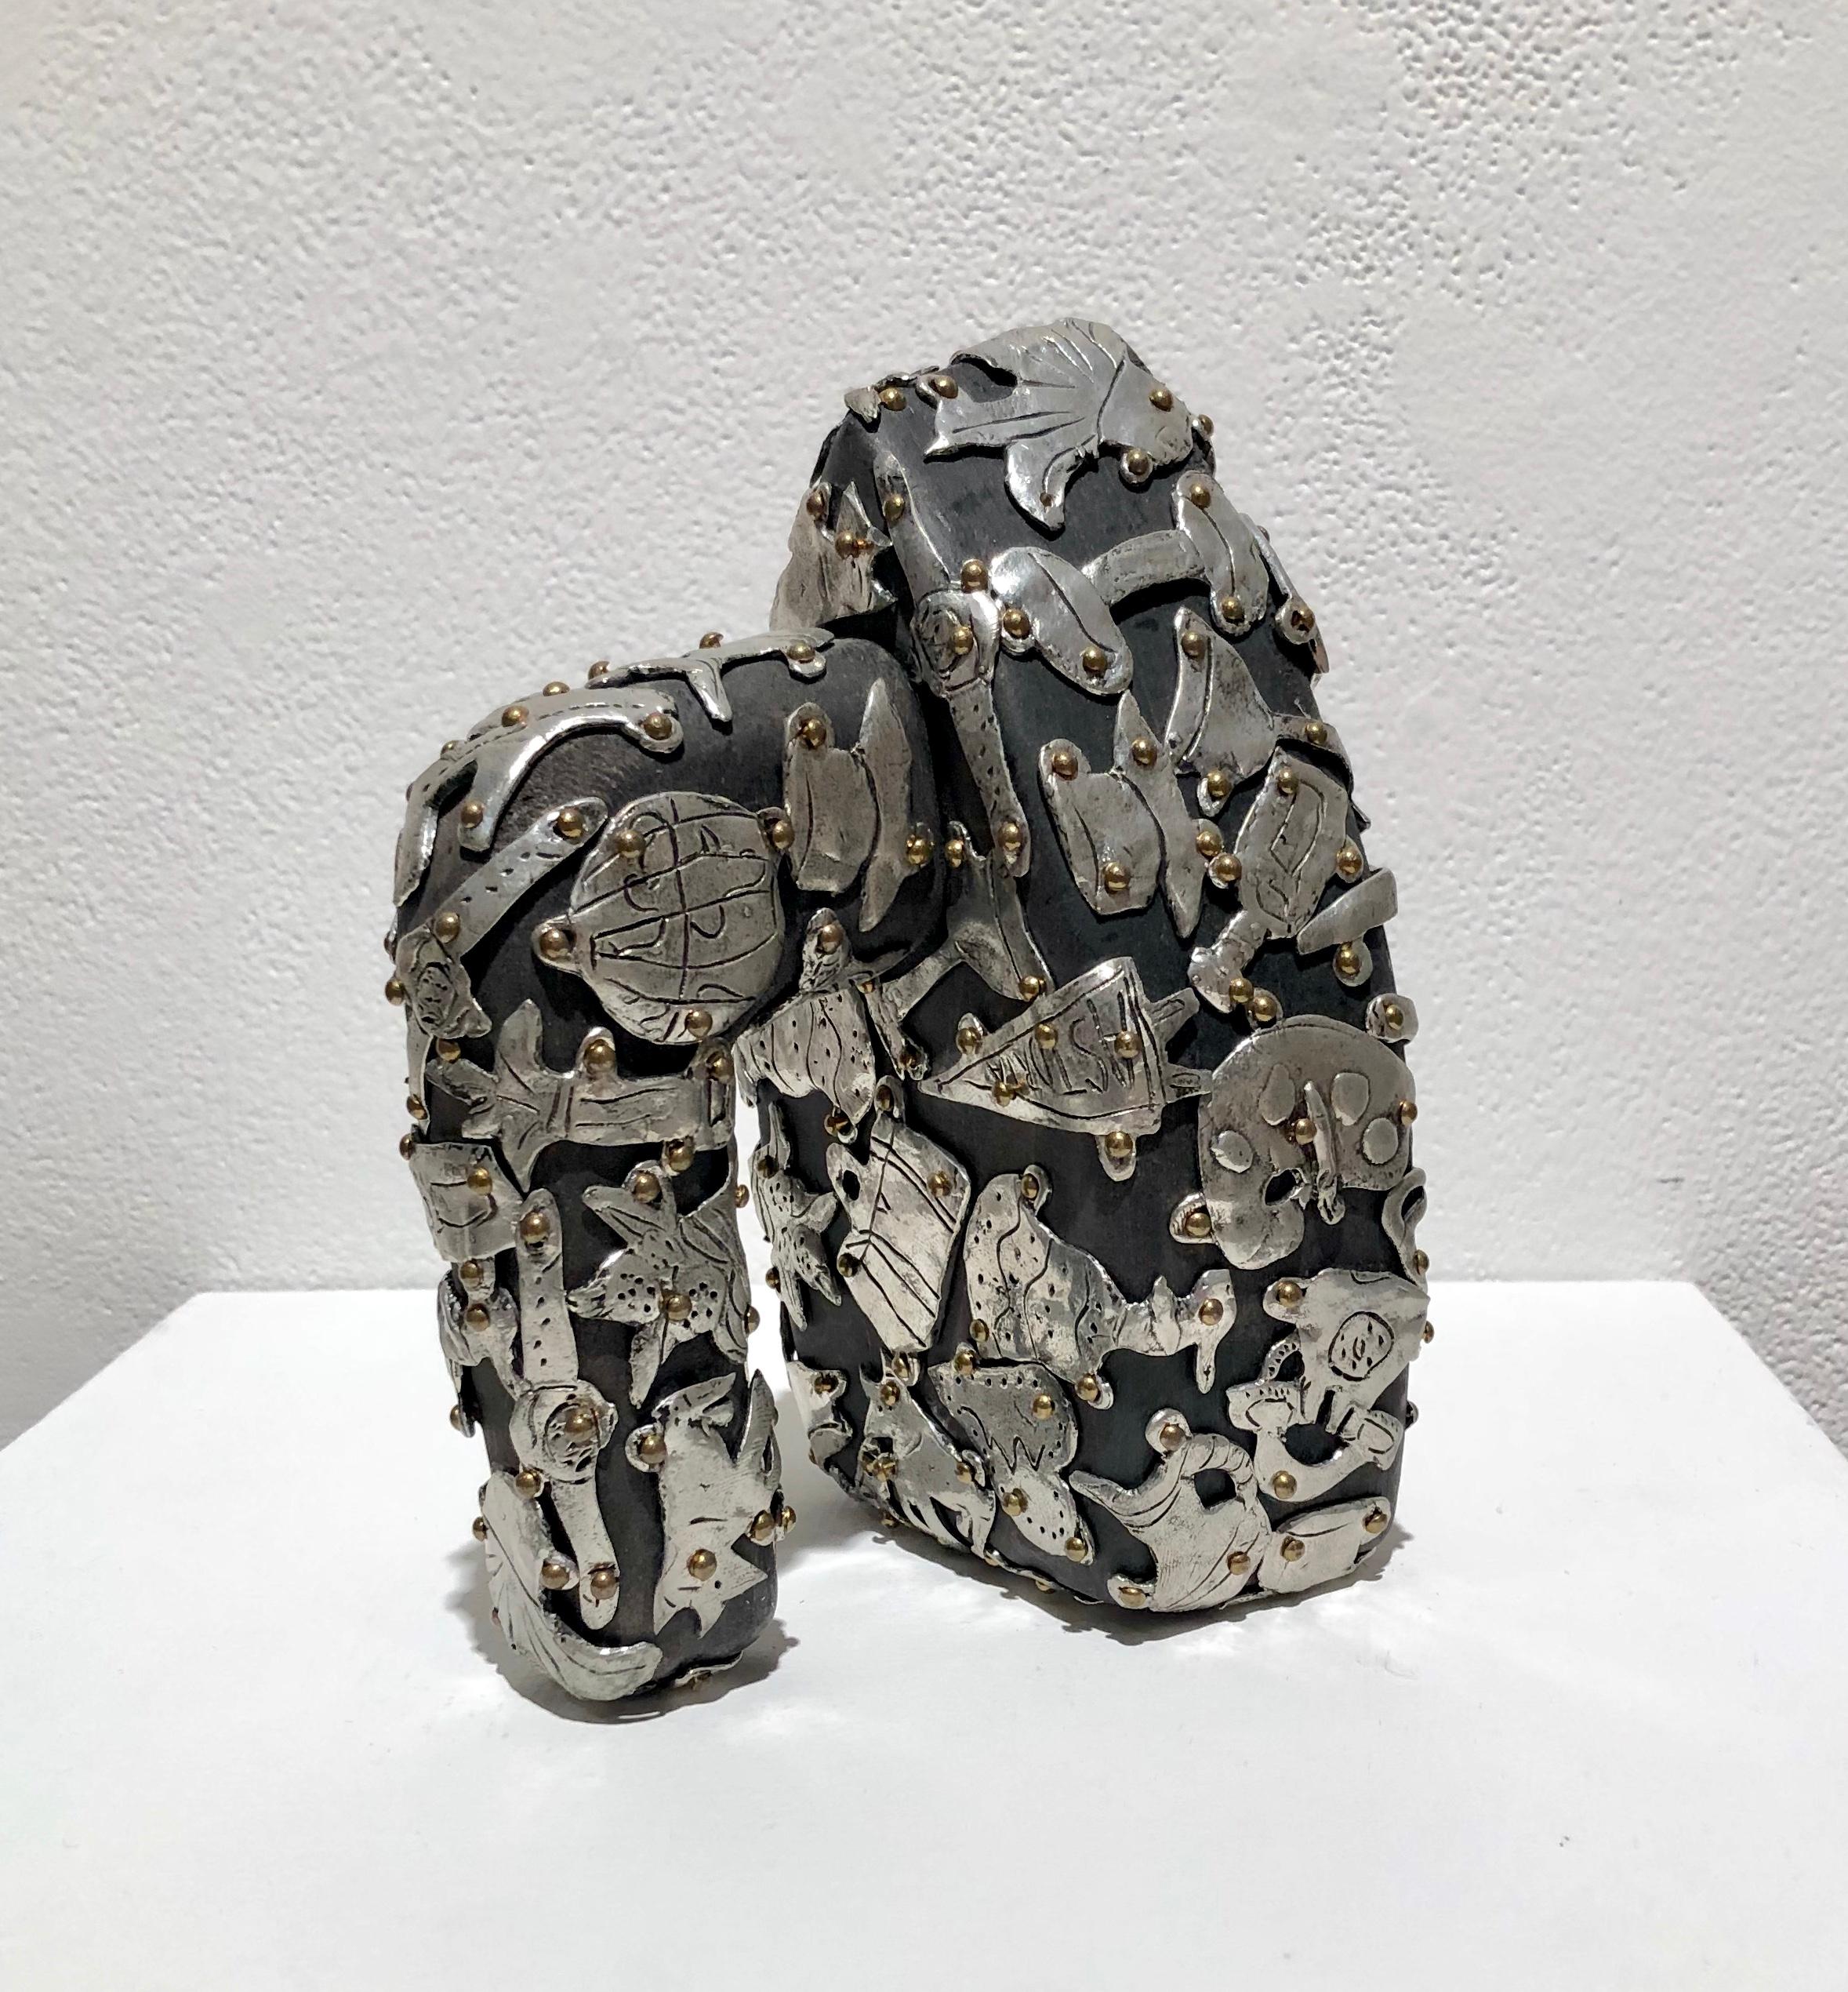 Claudia Demonte, Female Fetish Travel Iron, 2018, pewter and brass on wood, 7 x 5 x 6 in 

Small sculpture of an iron. Pewter objects including balloons, gloves, tennis rackets, purses and pennants in pewter adorn the wood bag.

Claudia DeMonte